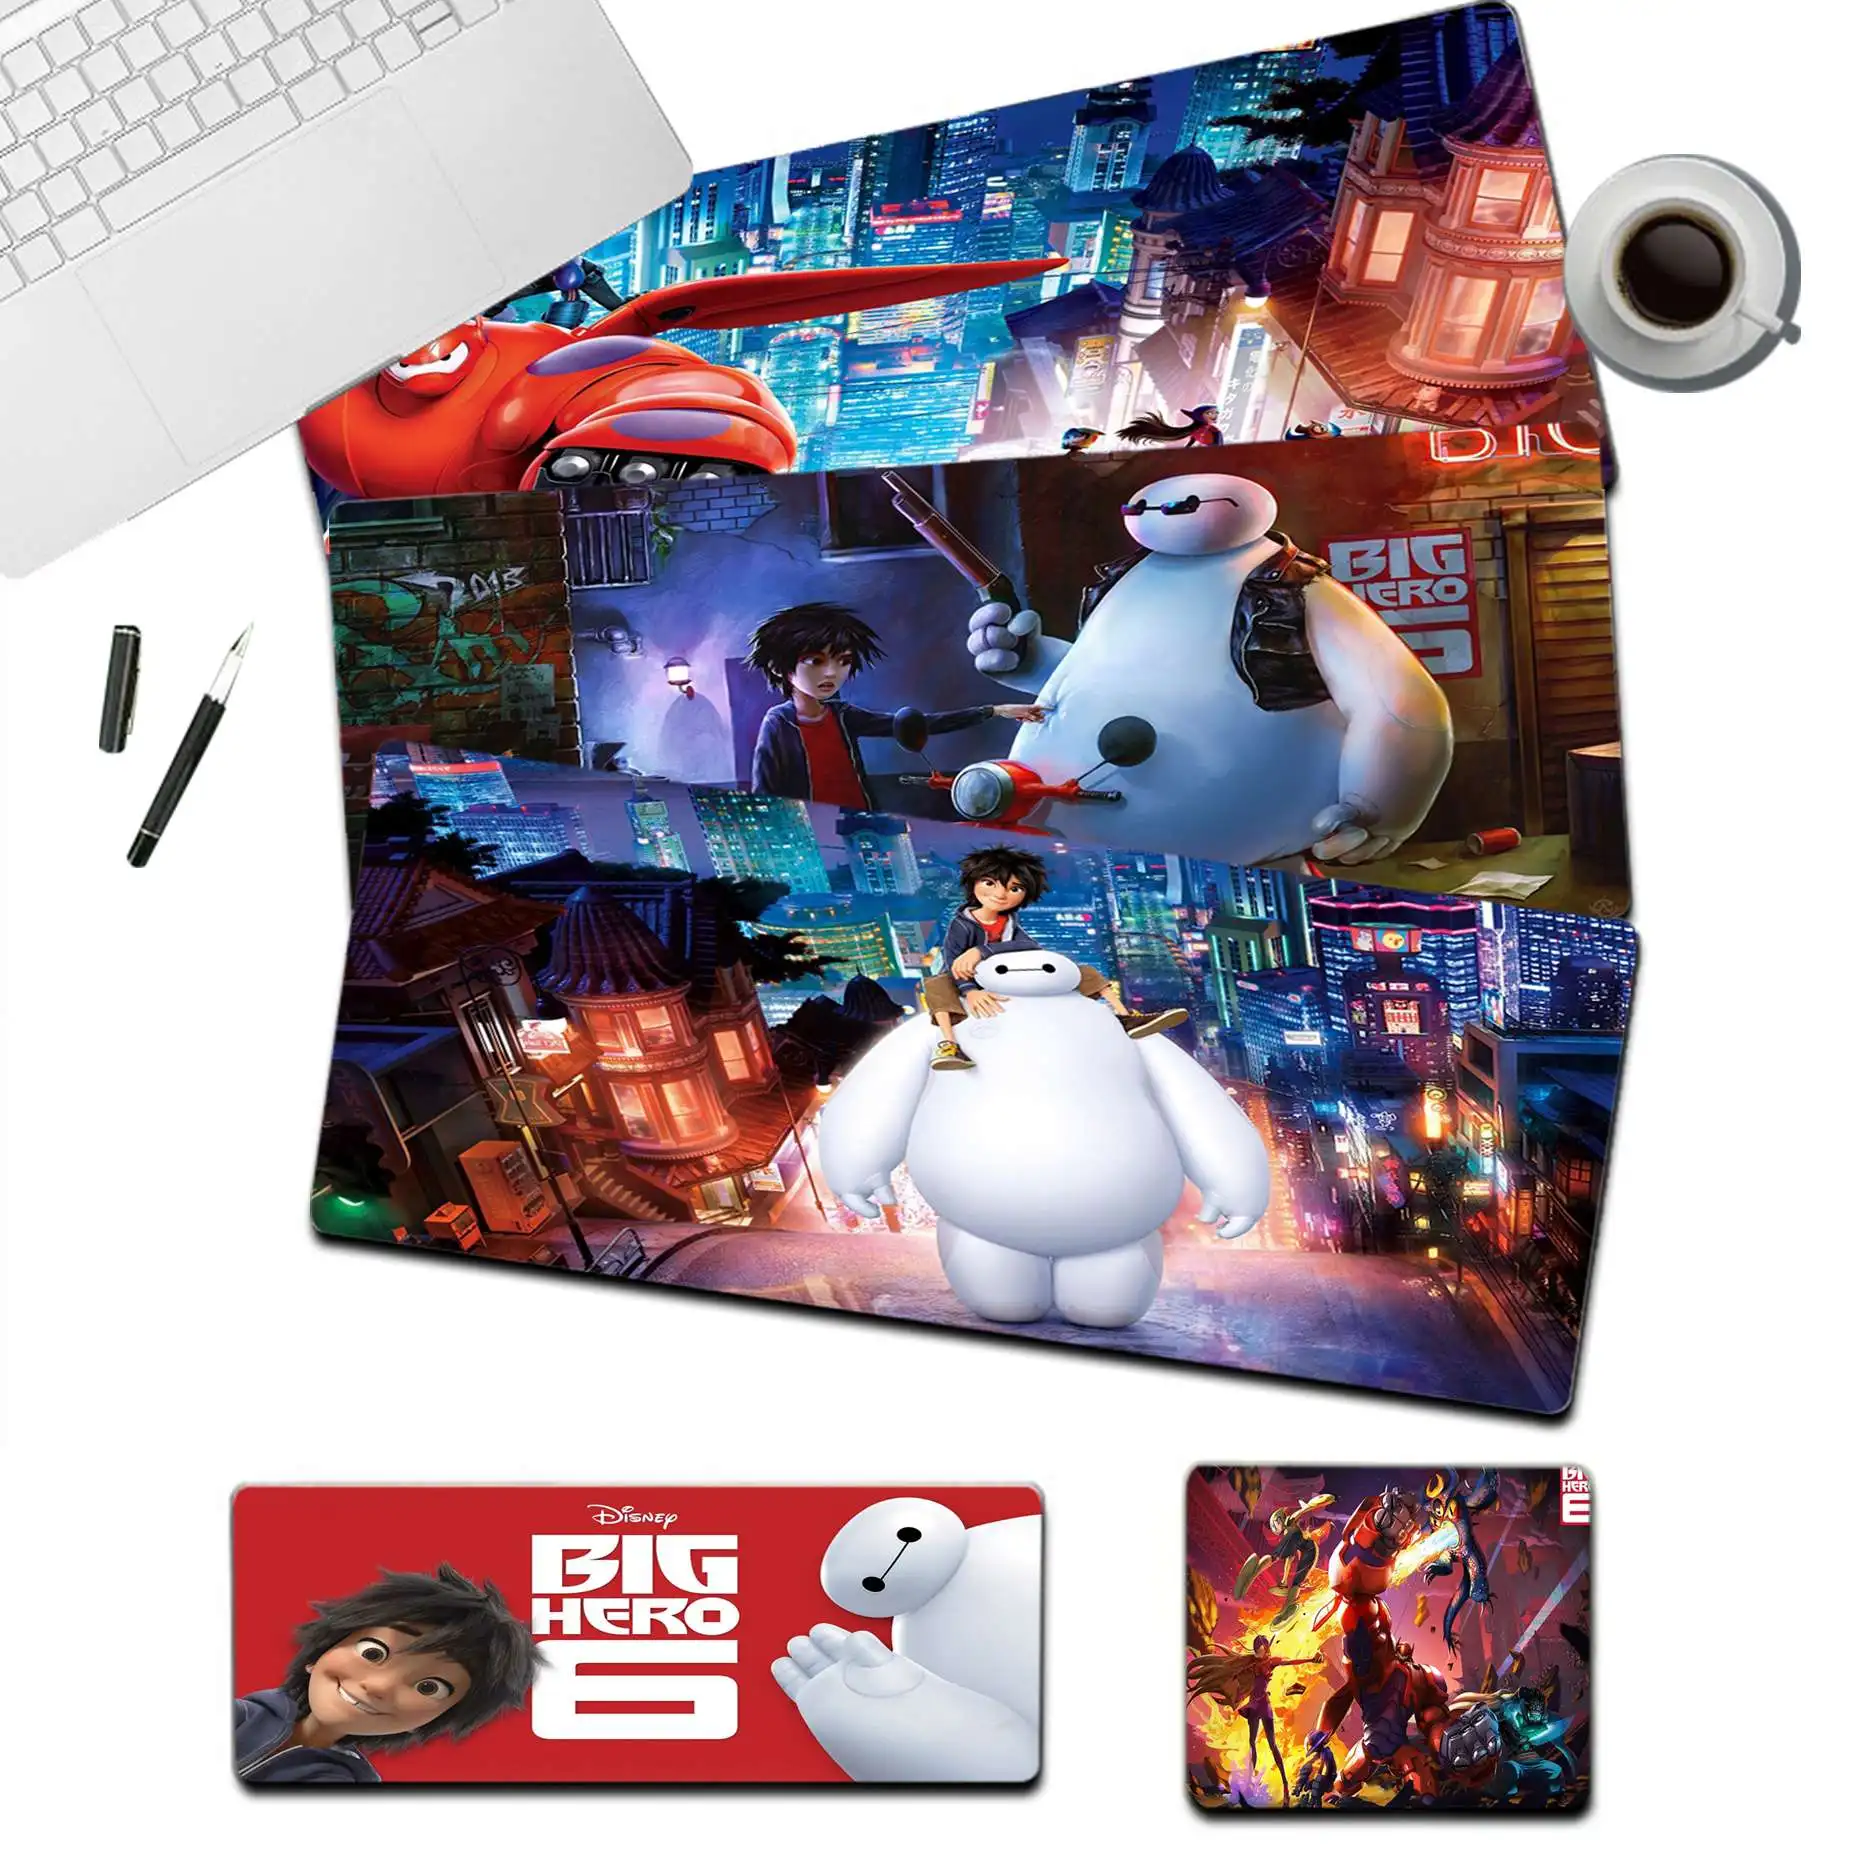 

Disney Big Hero 6 My Favorite Large sizes DIY Custom Mouse pad mat Size for Mouse Keyboards Mat Mousepad for boyfriend Gift